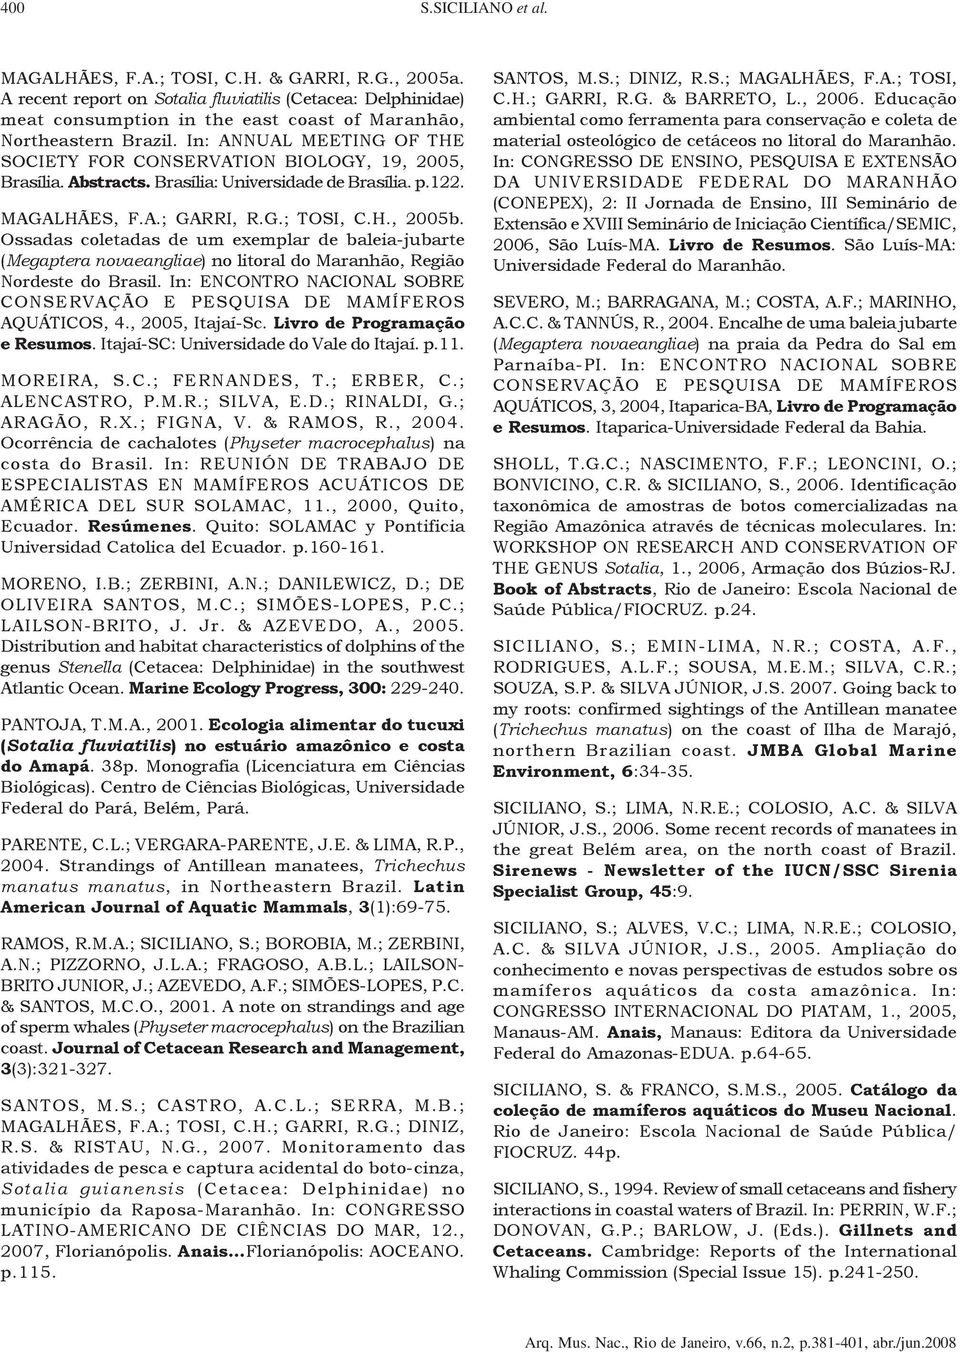 In: ANNUAL MEETING OF THE SOCIETY FOR CONSERVATION BIOLOGY, 19, 2005, Brasília. Abstracts. Brasília: Universidade de Brasília. p.122. MAGALHÃES, F.A.; GARRI, R.G.; TOSI, C.H., 2005b.